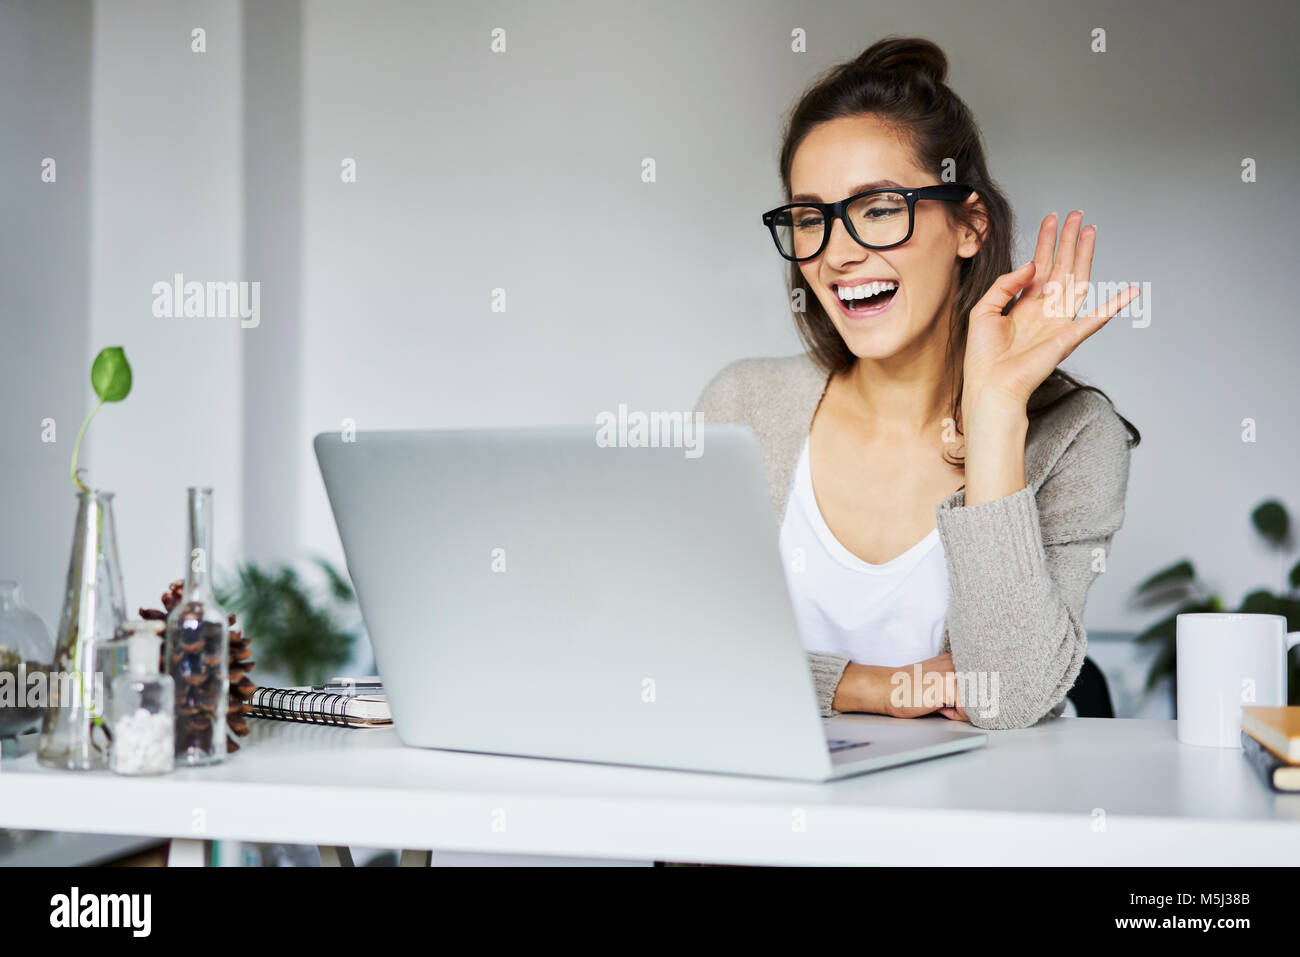 Young woman laughing during video chat at desk Stock Photo